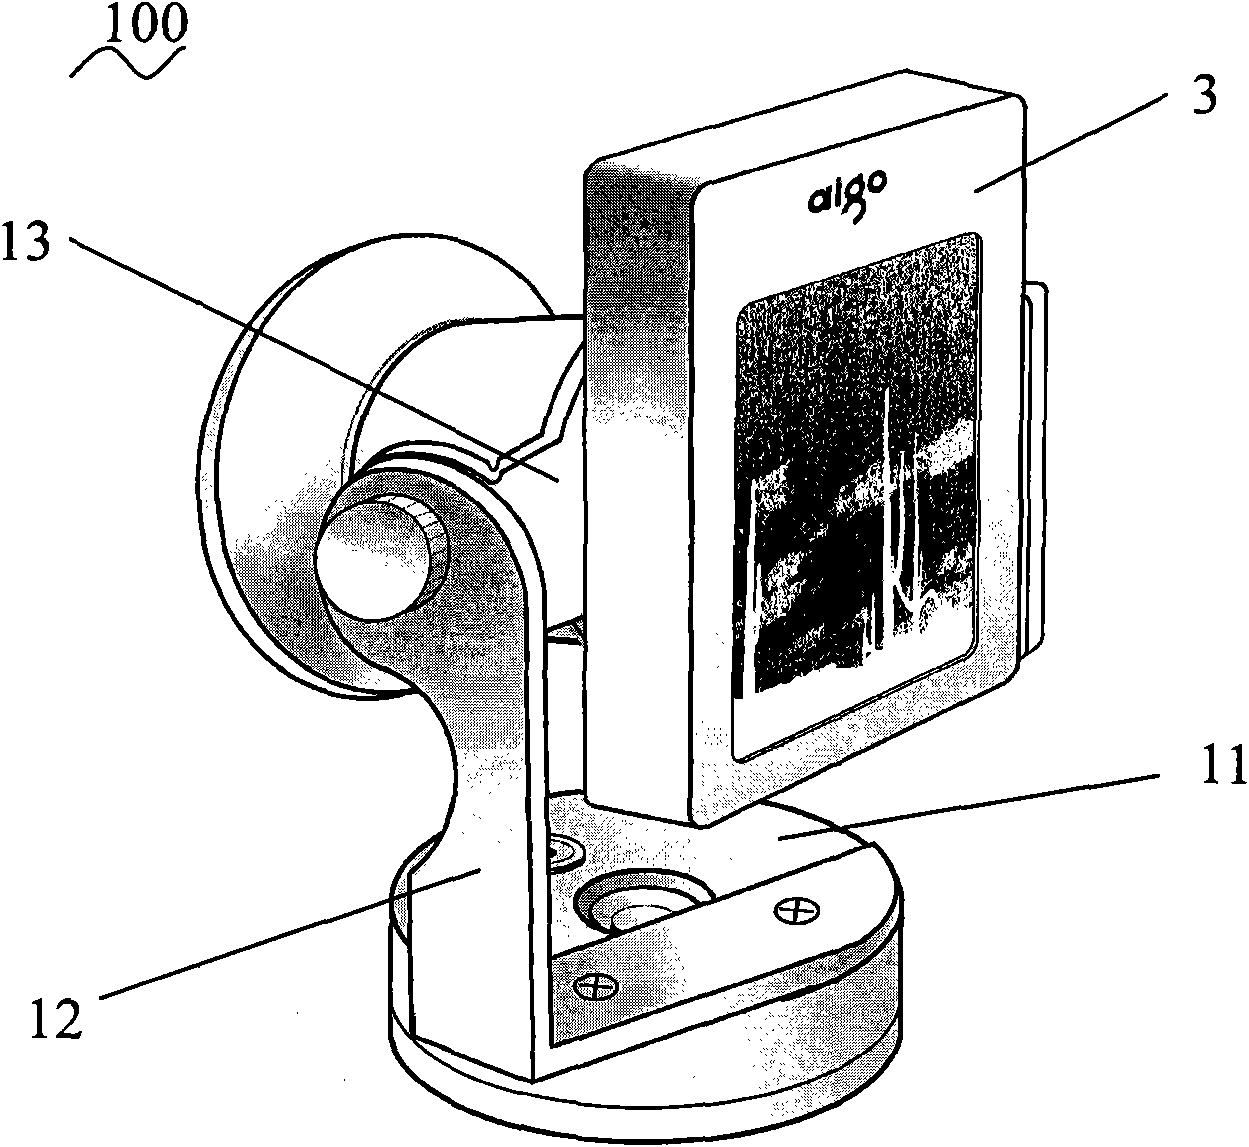 Full-view image shooting device